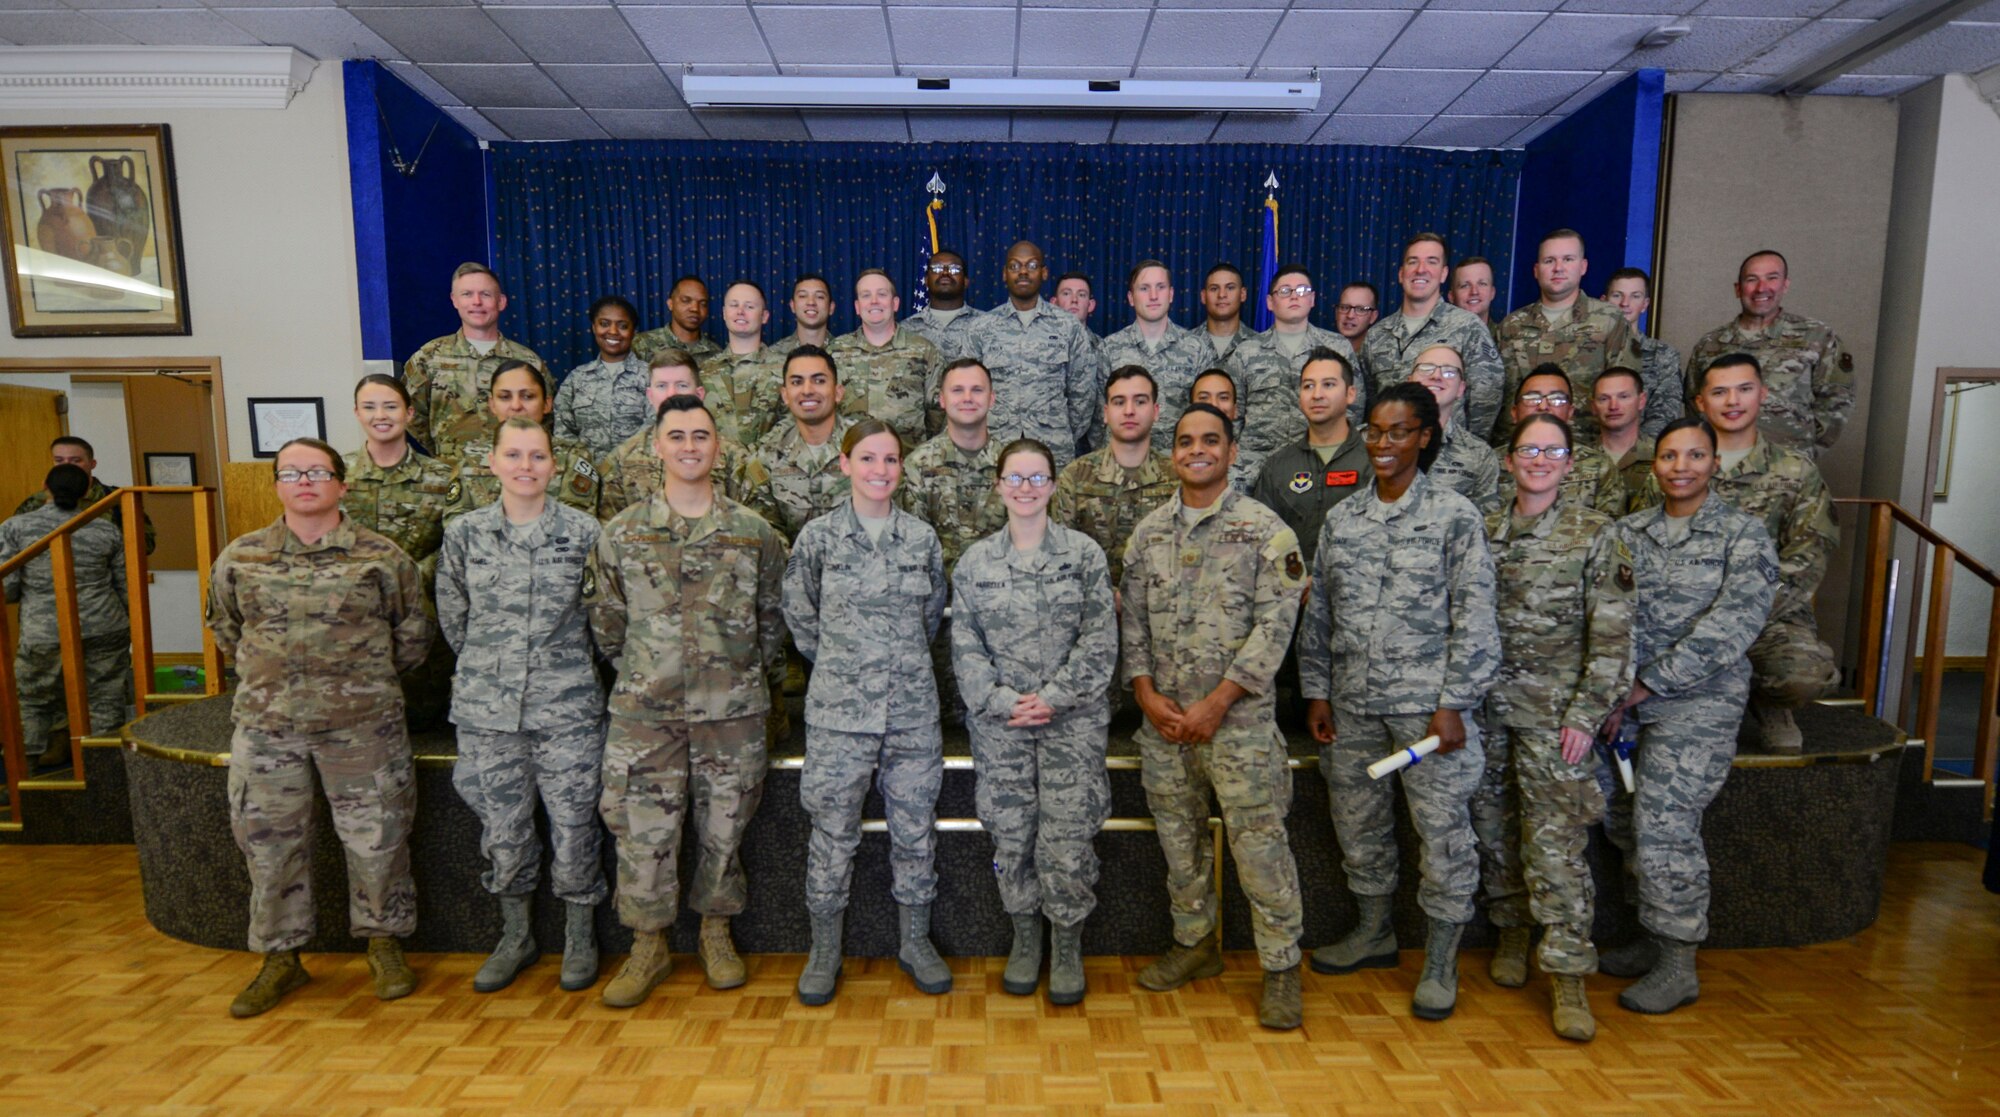 Community College of the Air Force (CCAF) graduates pose for a group photo after their graduation ceremony held at the Mountain View Club on June 5, 2019. Airmen must successfully complete technical training as well as additional classes outside of work in order to receive a CCAF degree. (U.S Air Force photo by Senior Airman Alexandria Crawford)